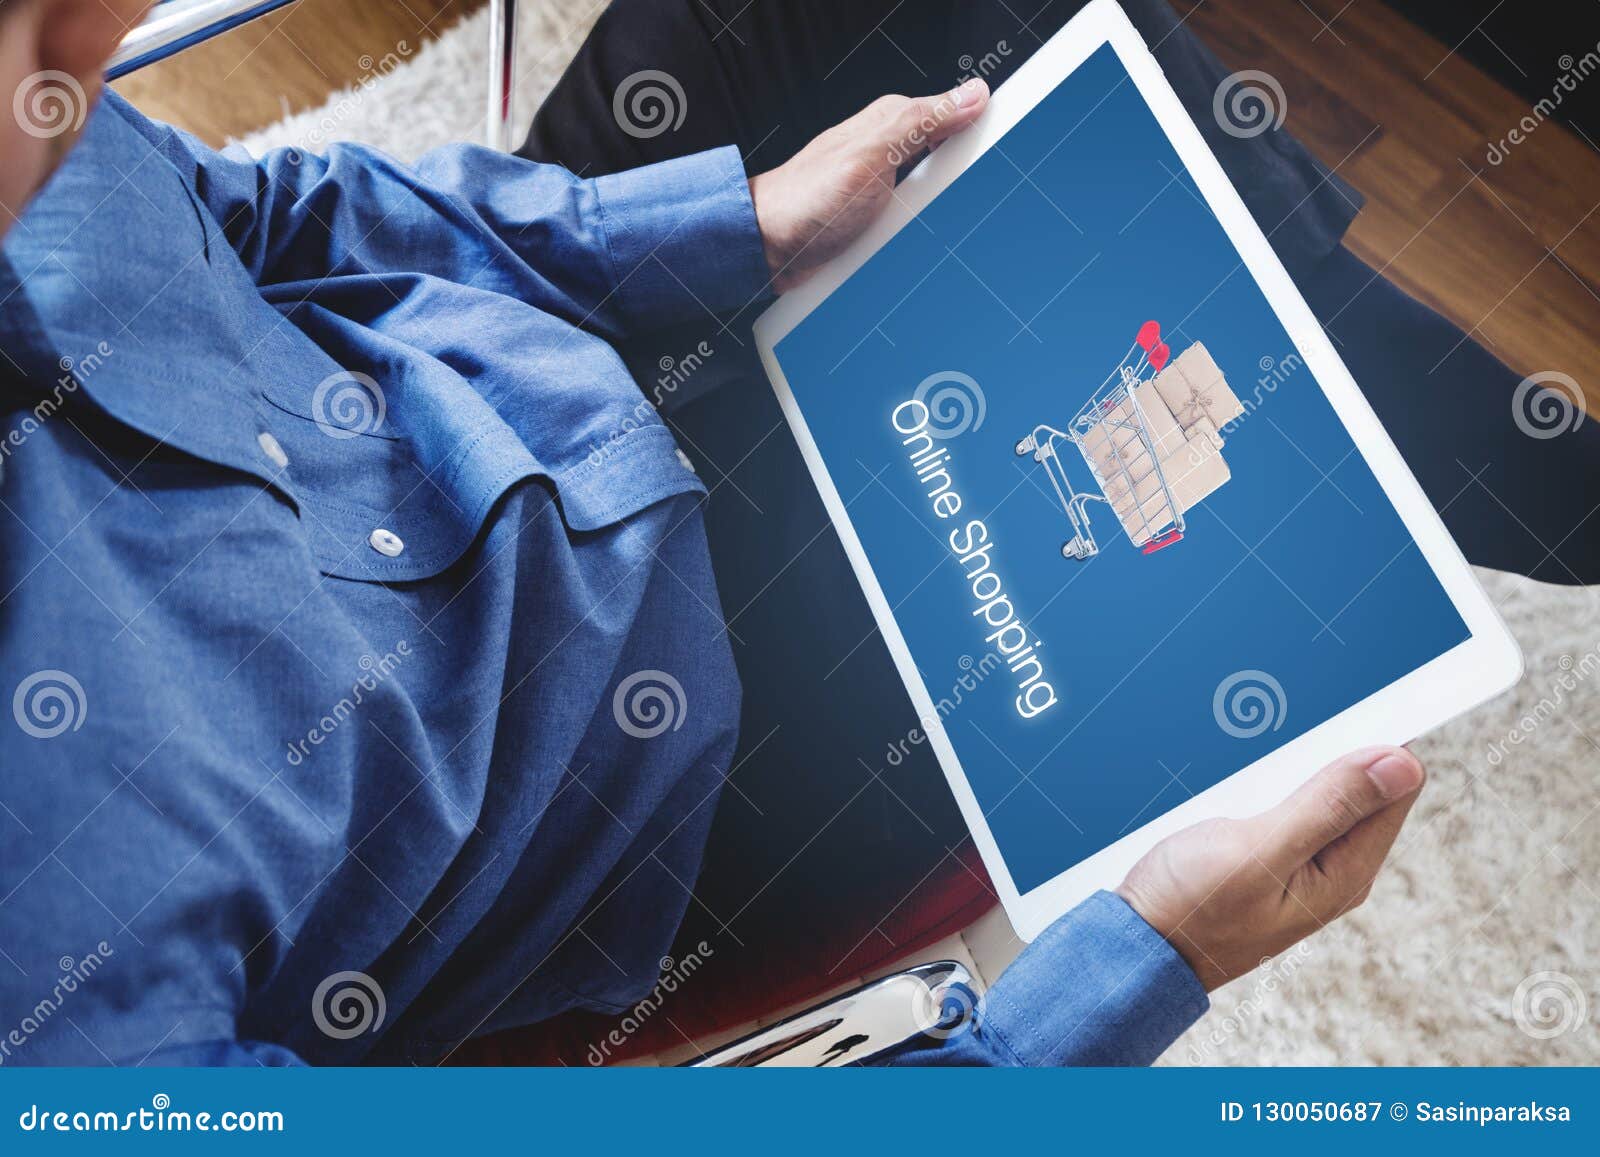 online shopping and online retailer business. a man using digital tablet for shopping and selling online